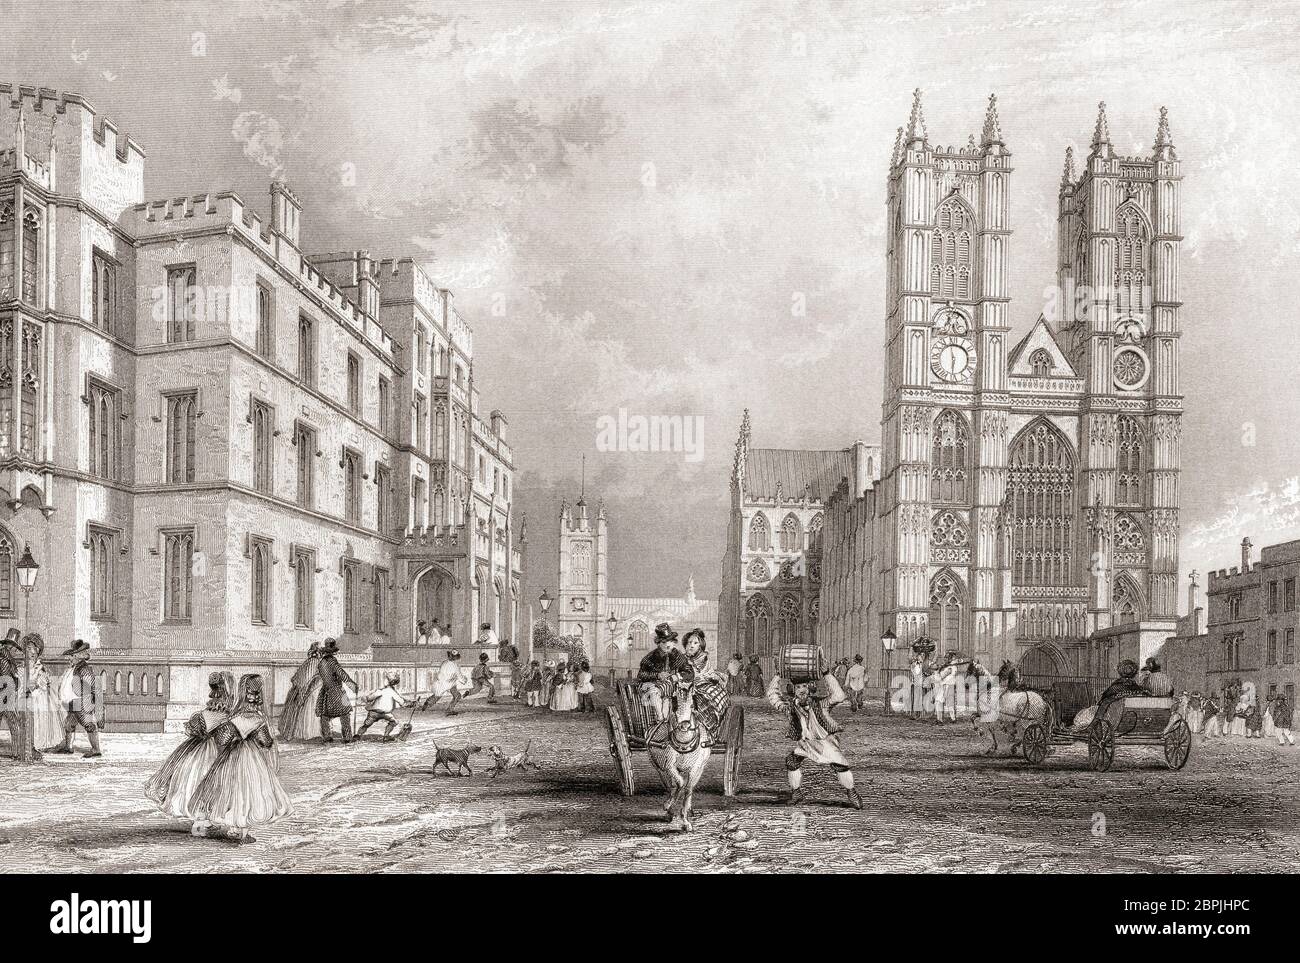 Westminster Hospital and Abbey Church, City of Westminster, London, England, 19th century.  From The History of London: Illustrated by Views in London and Westminster, published c.1838. Stock Photo